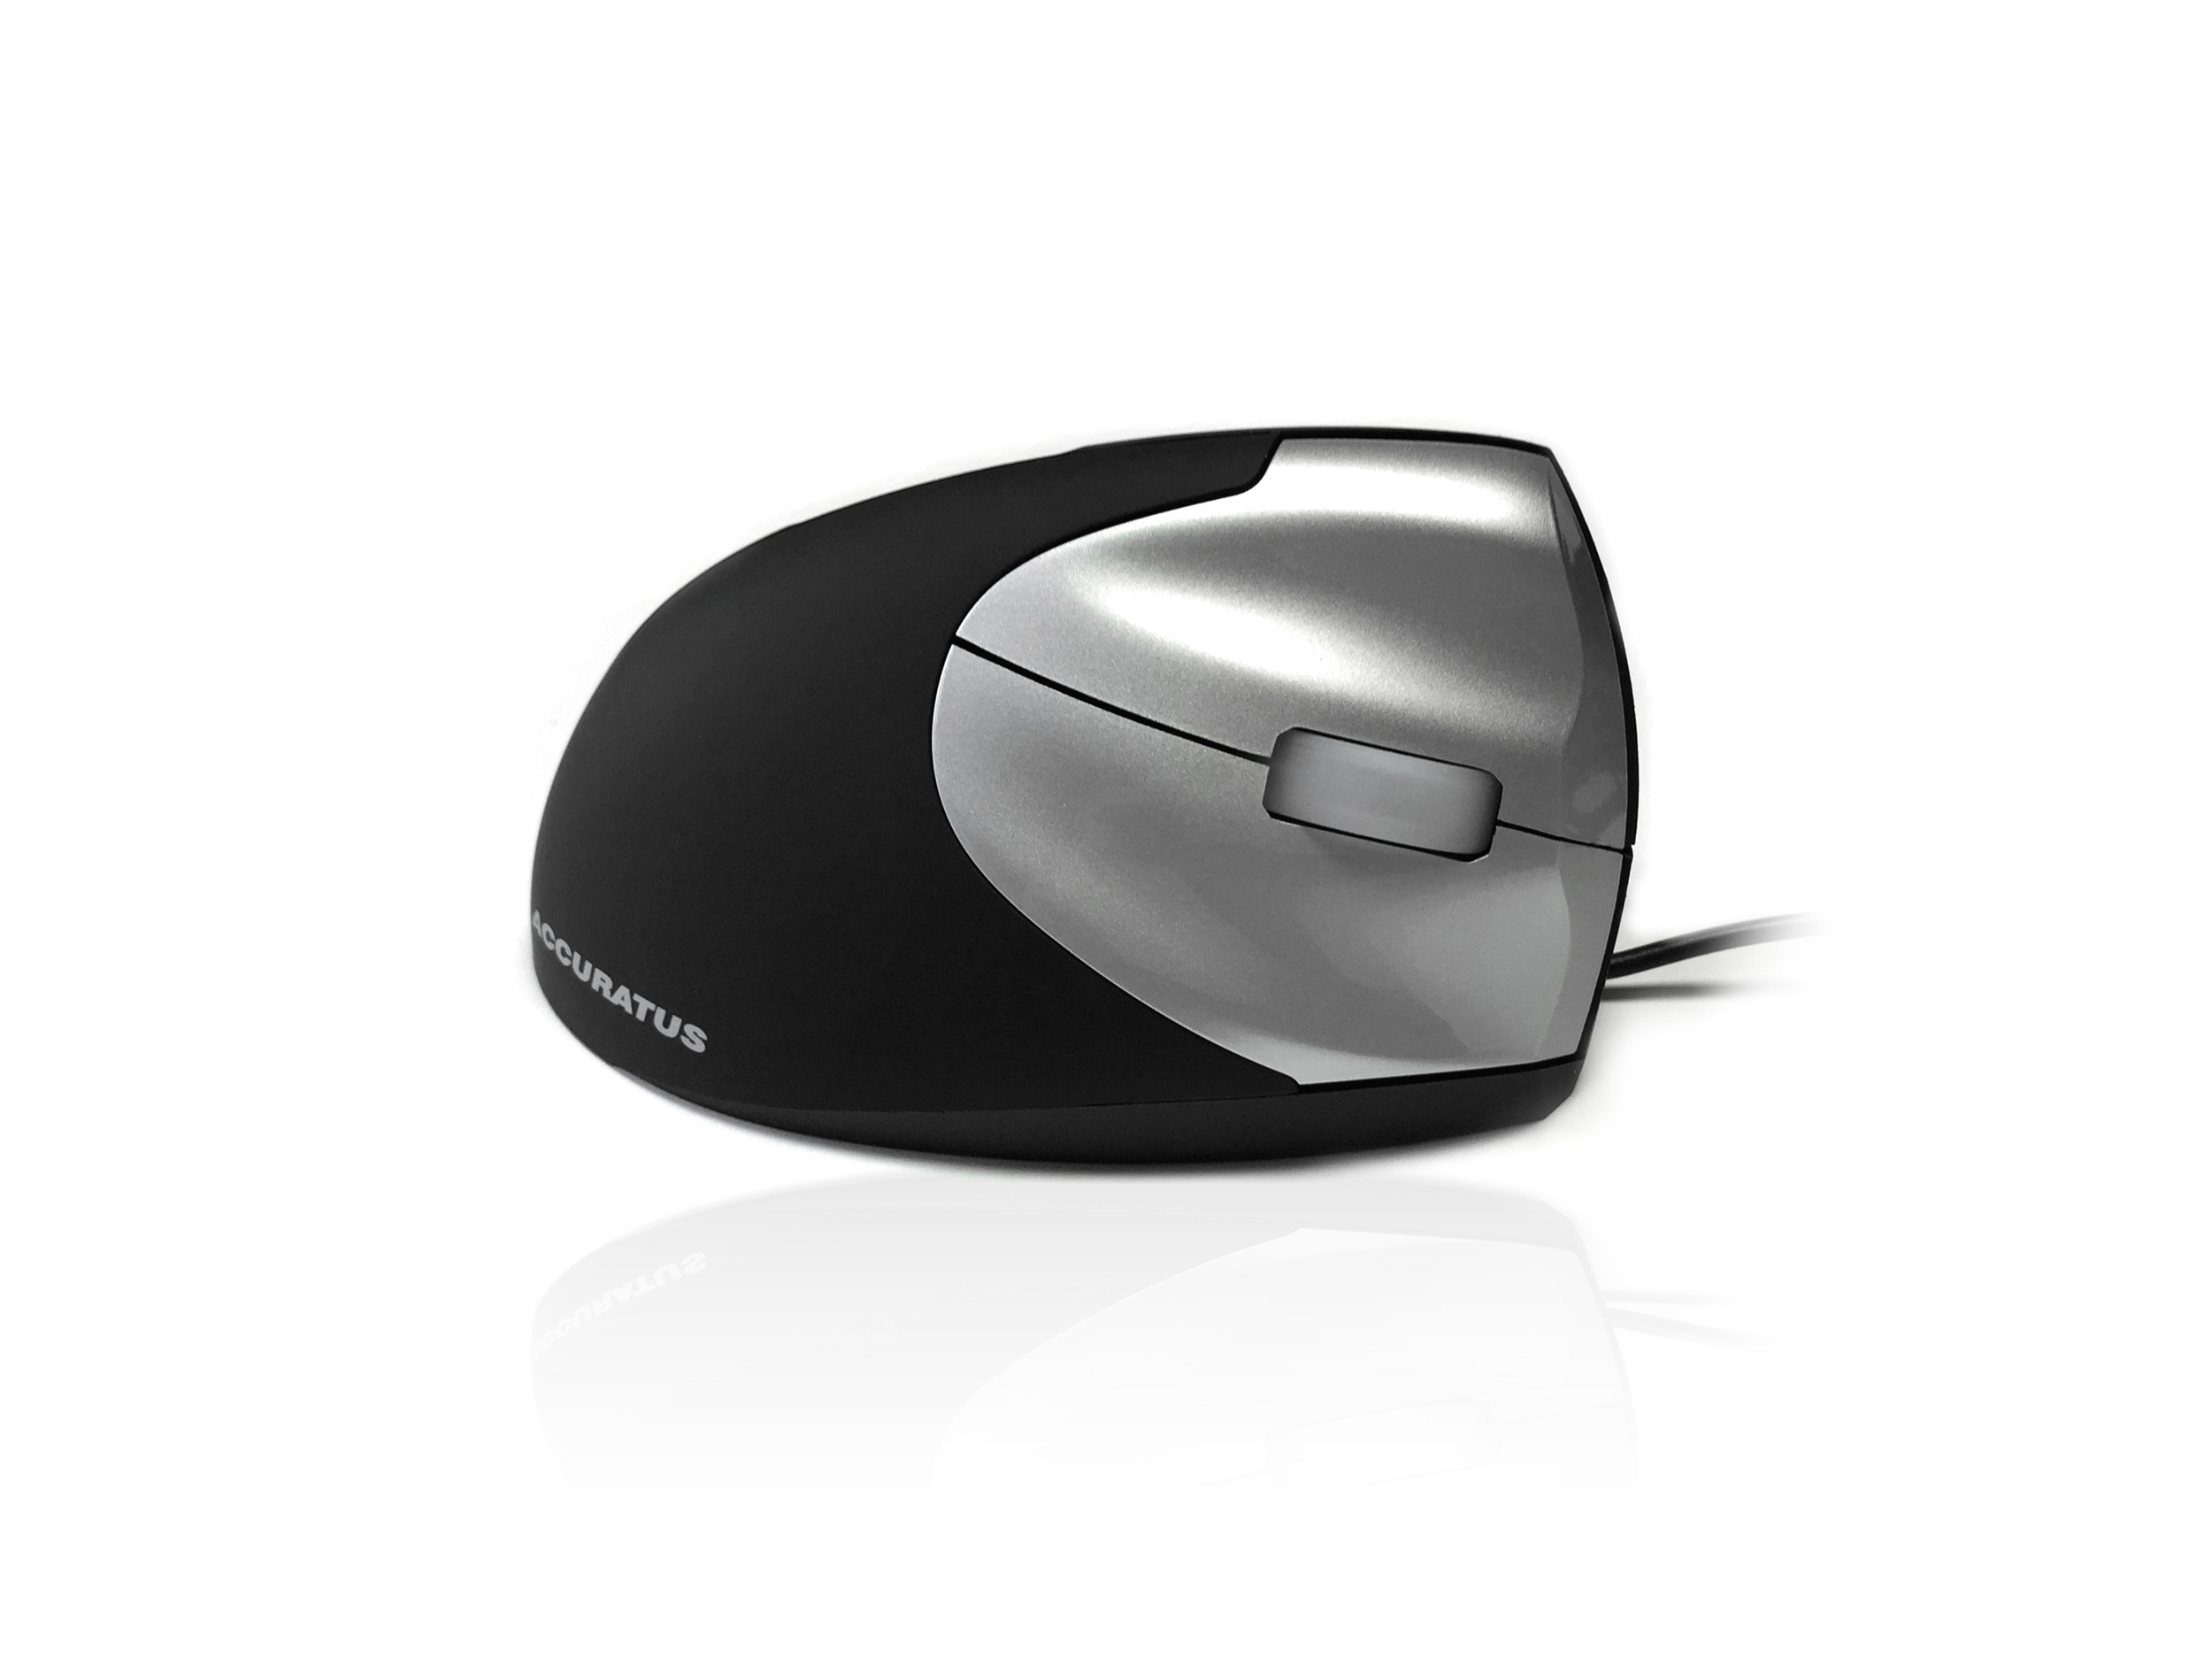 The Grip Mouse